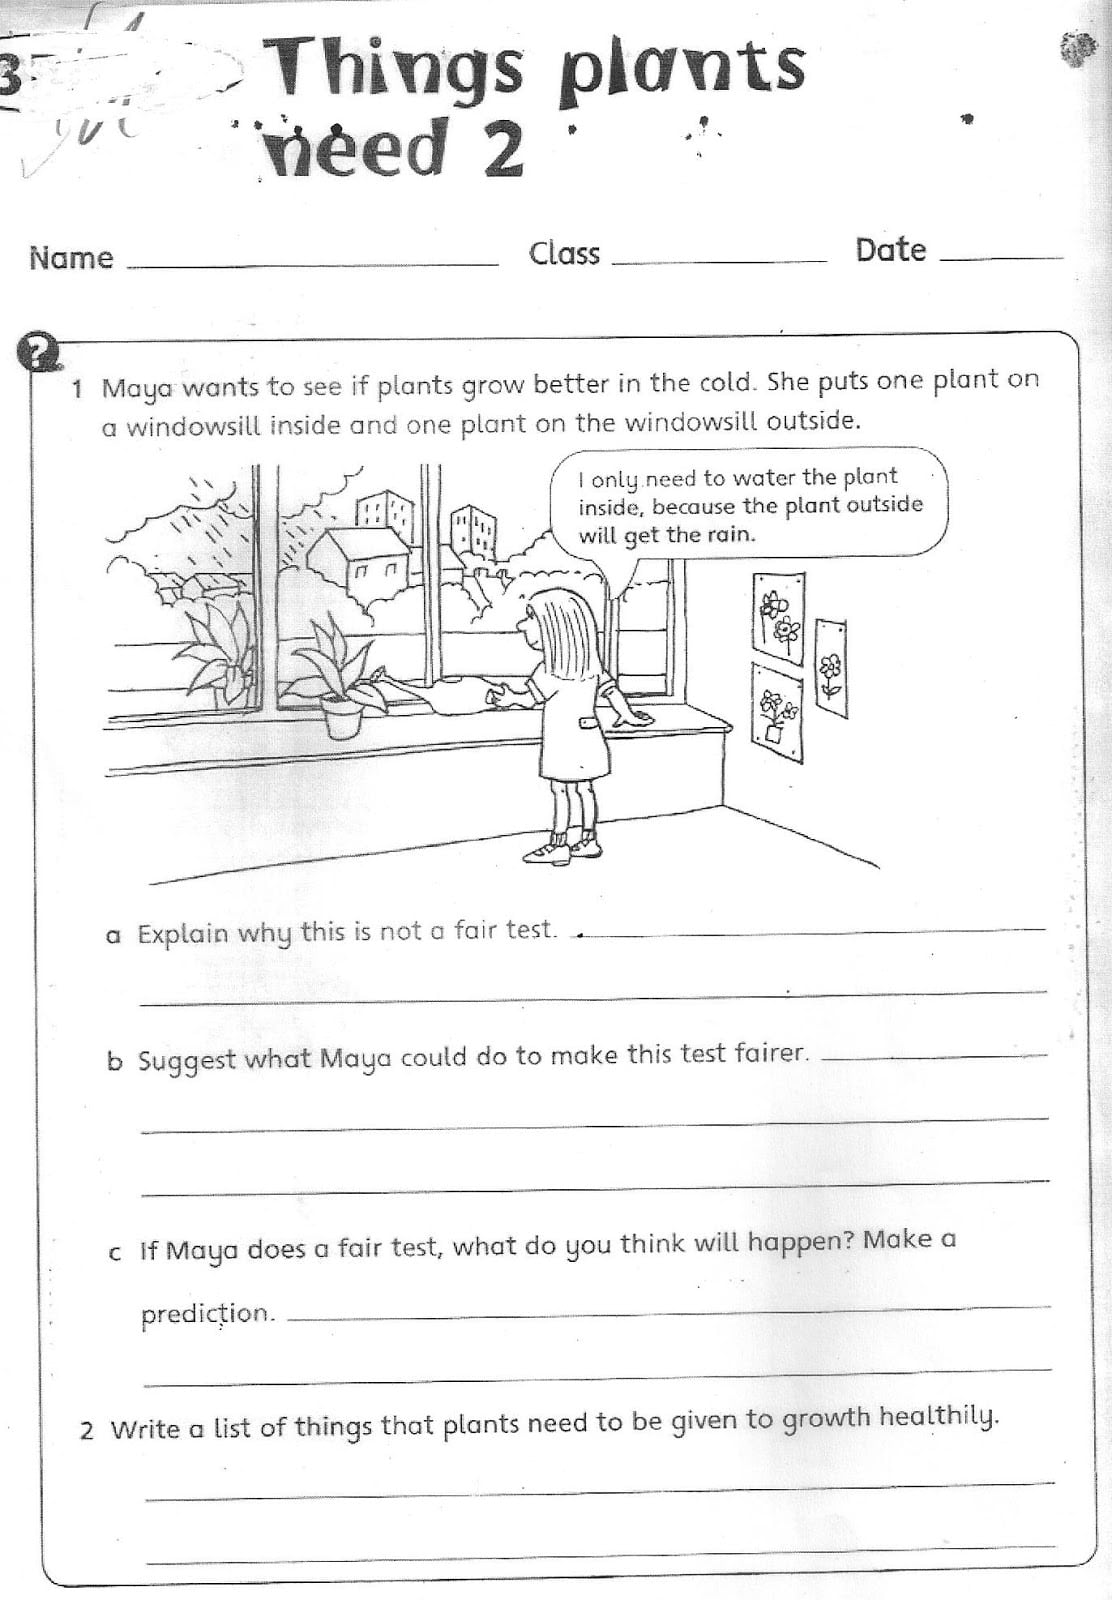 Science Fusion Grade 3 Worksheets Worksheets For All â Worksheets